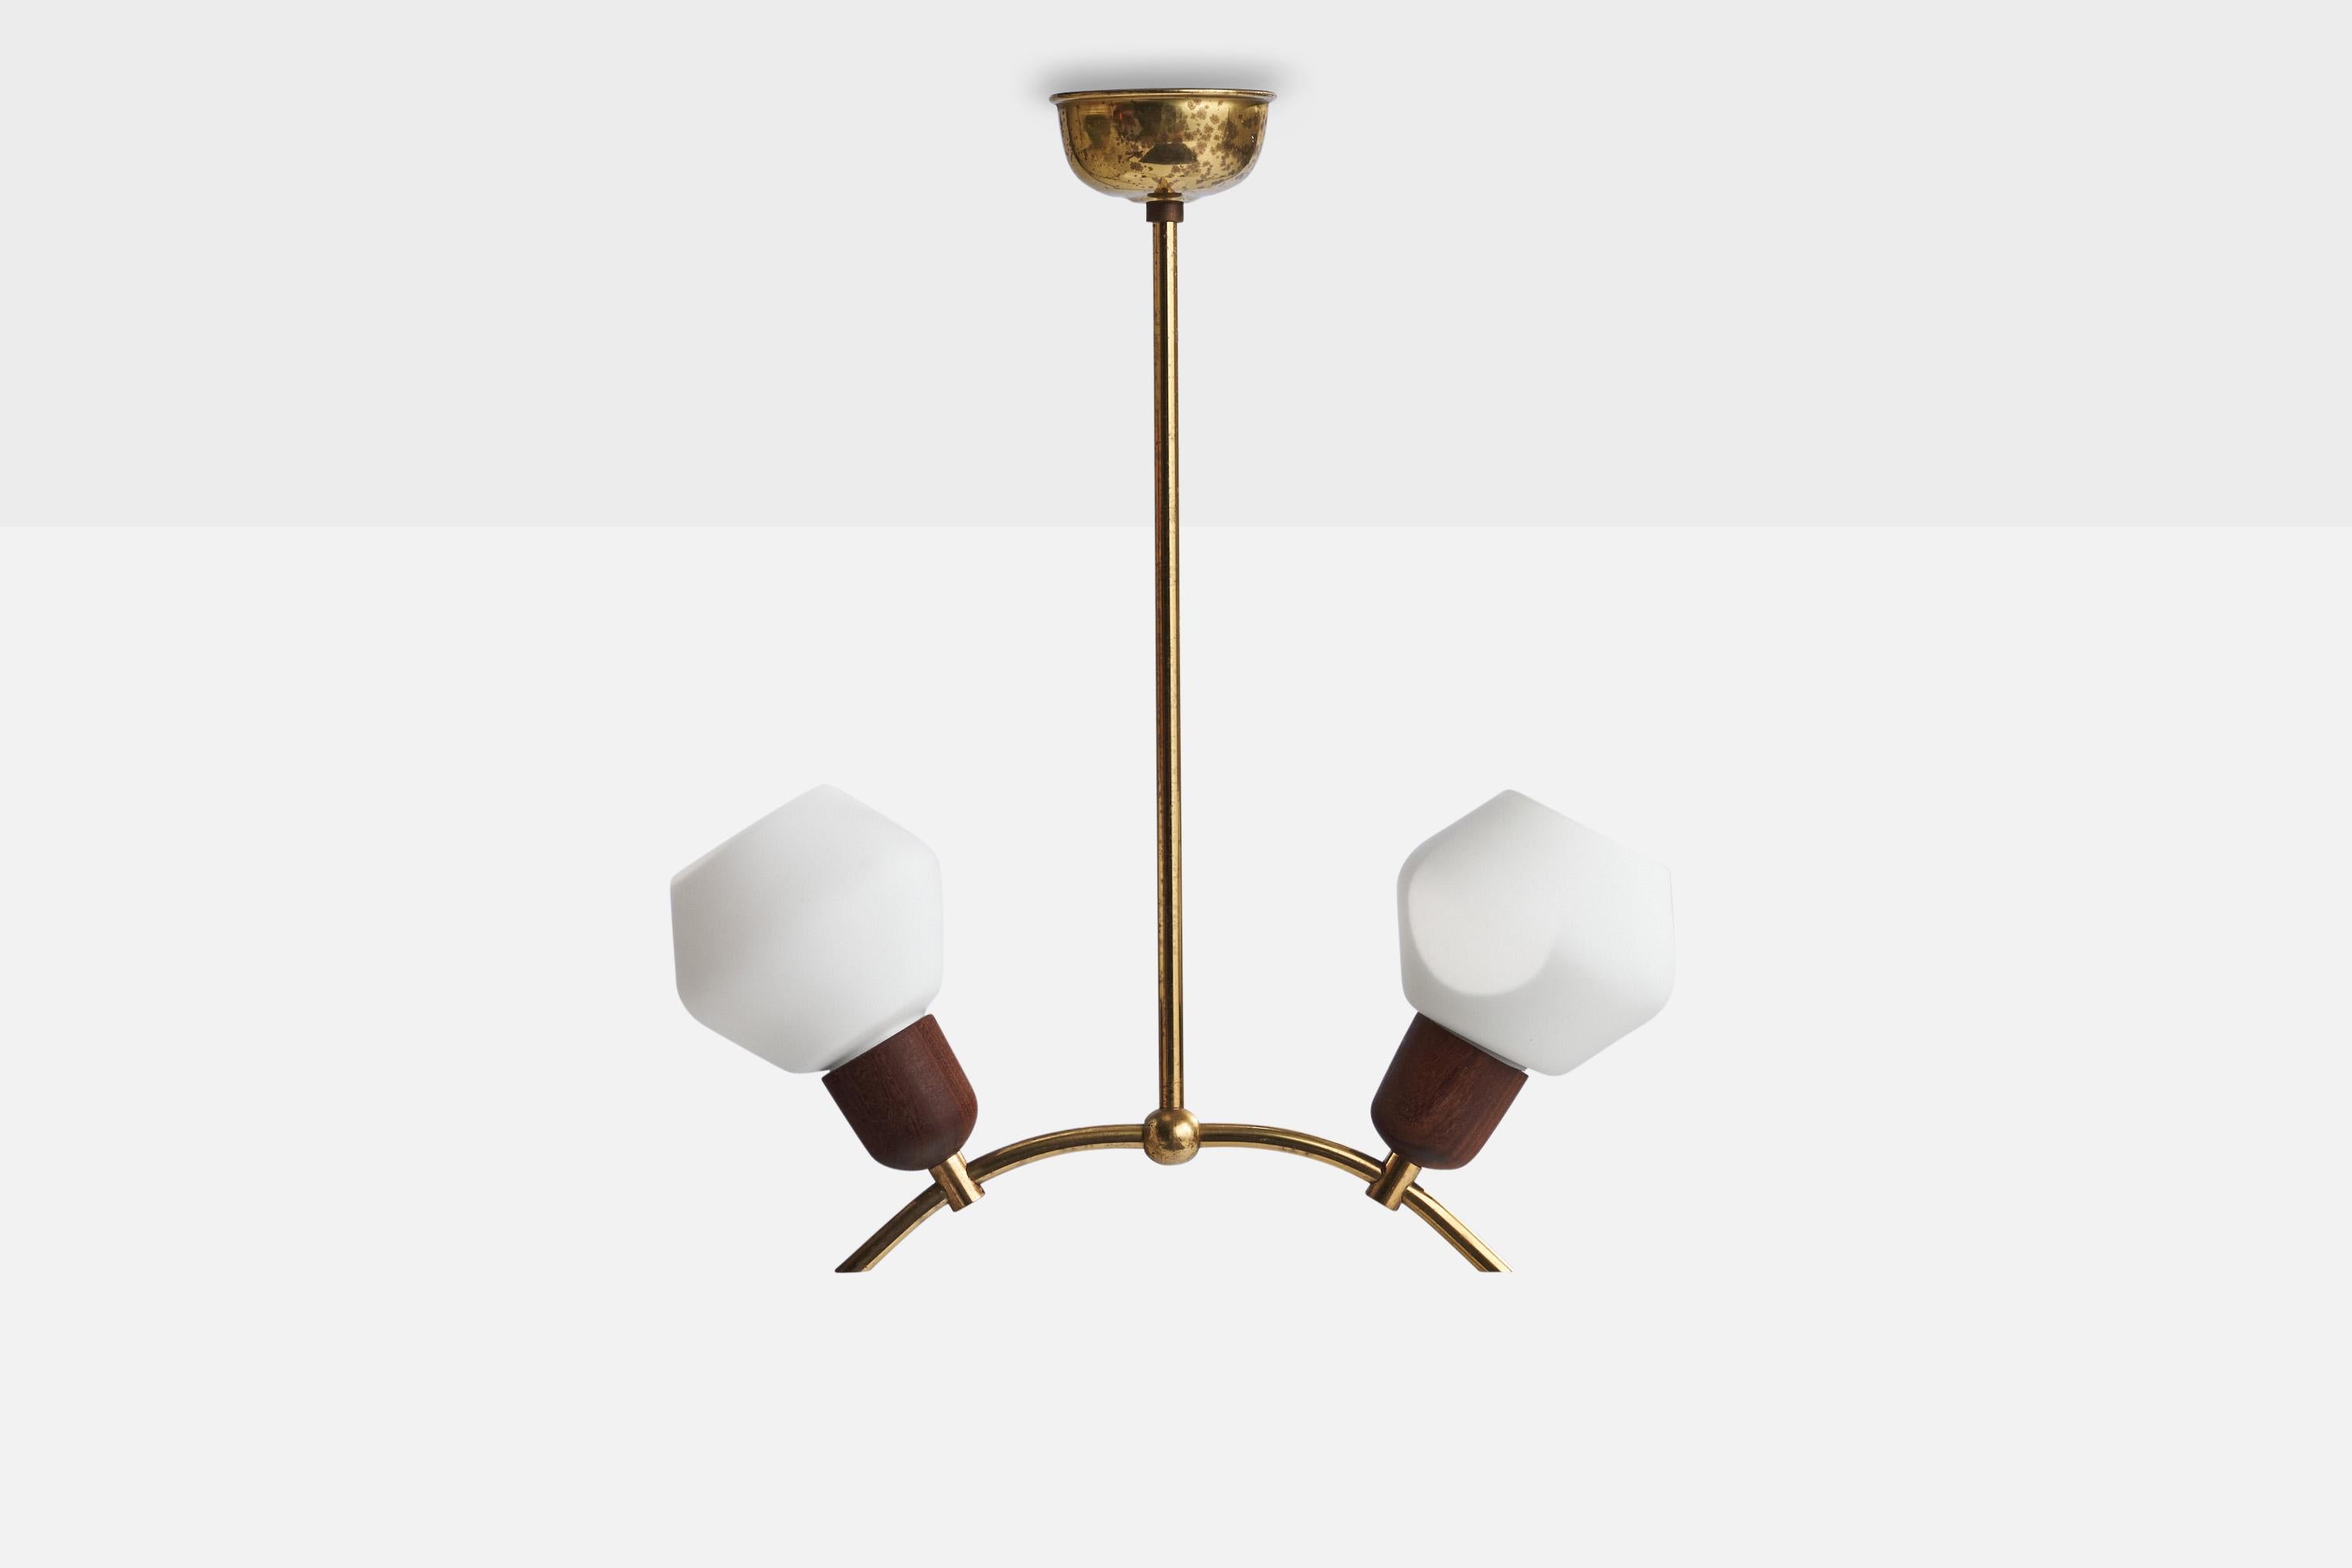 A brass, teak and opaline glass pendant light designed and produced in Sweden, 1950s.

Dimensions of canopy (inches): 1.75”  H x 3.25” Diameter
Socket takes standard E-14 bulbs. 2 sockets.There is no maximum wattage stated on the fixture. All